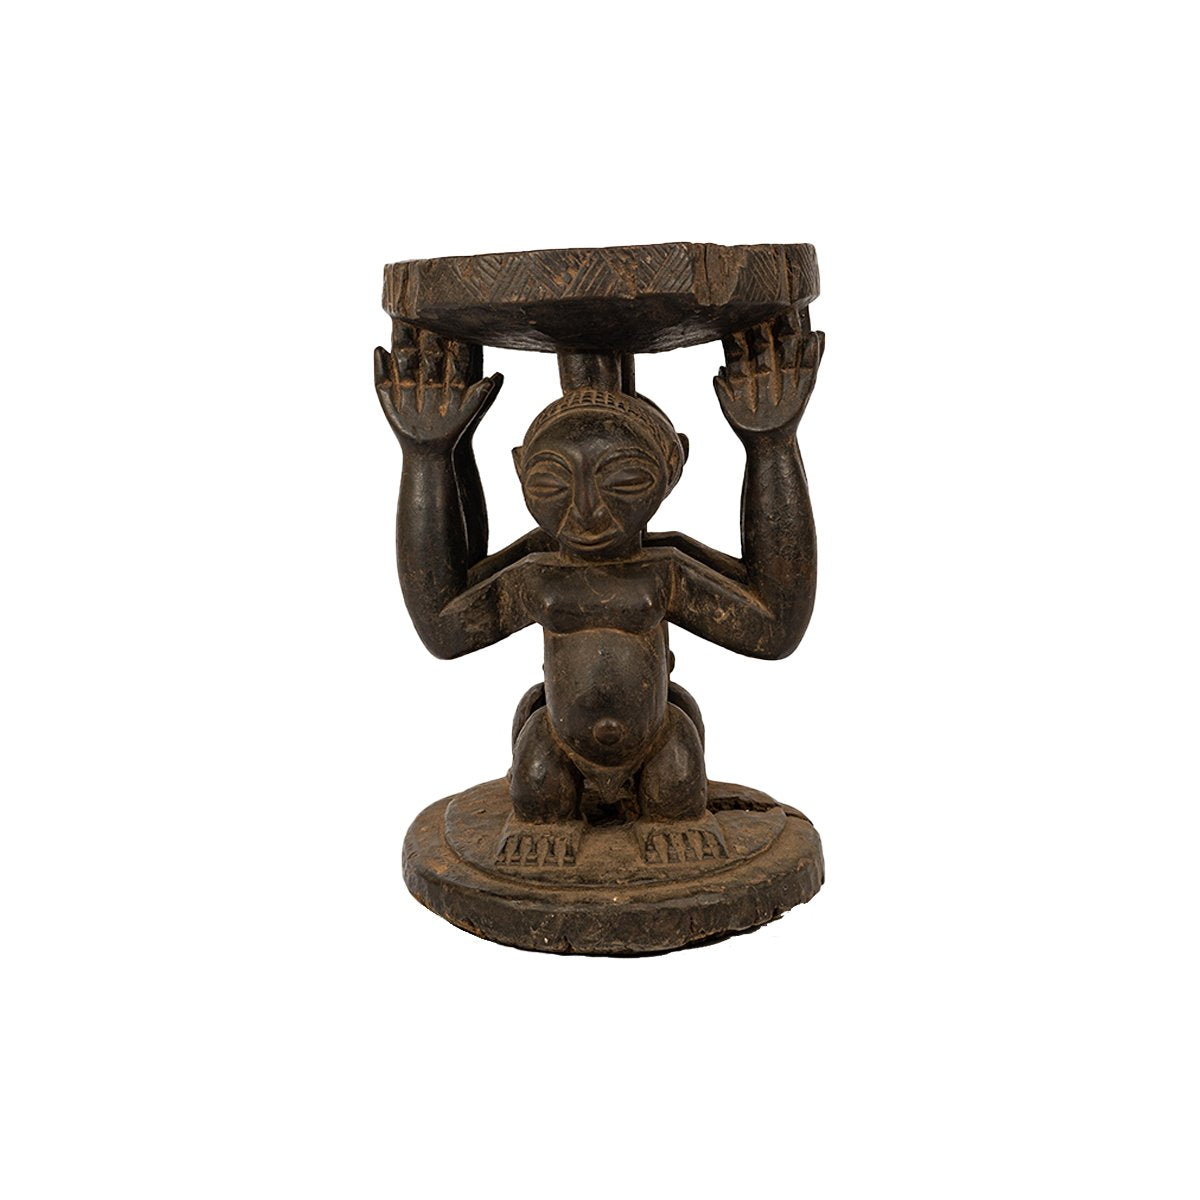 Hemba Luba stool - Authentic African handicrafts | Clothing, bags, painting, toys & more - CULTURE HUB by Muthoni Unchained